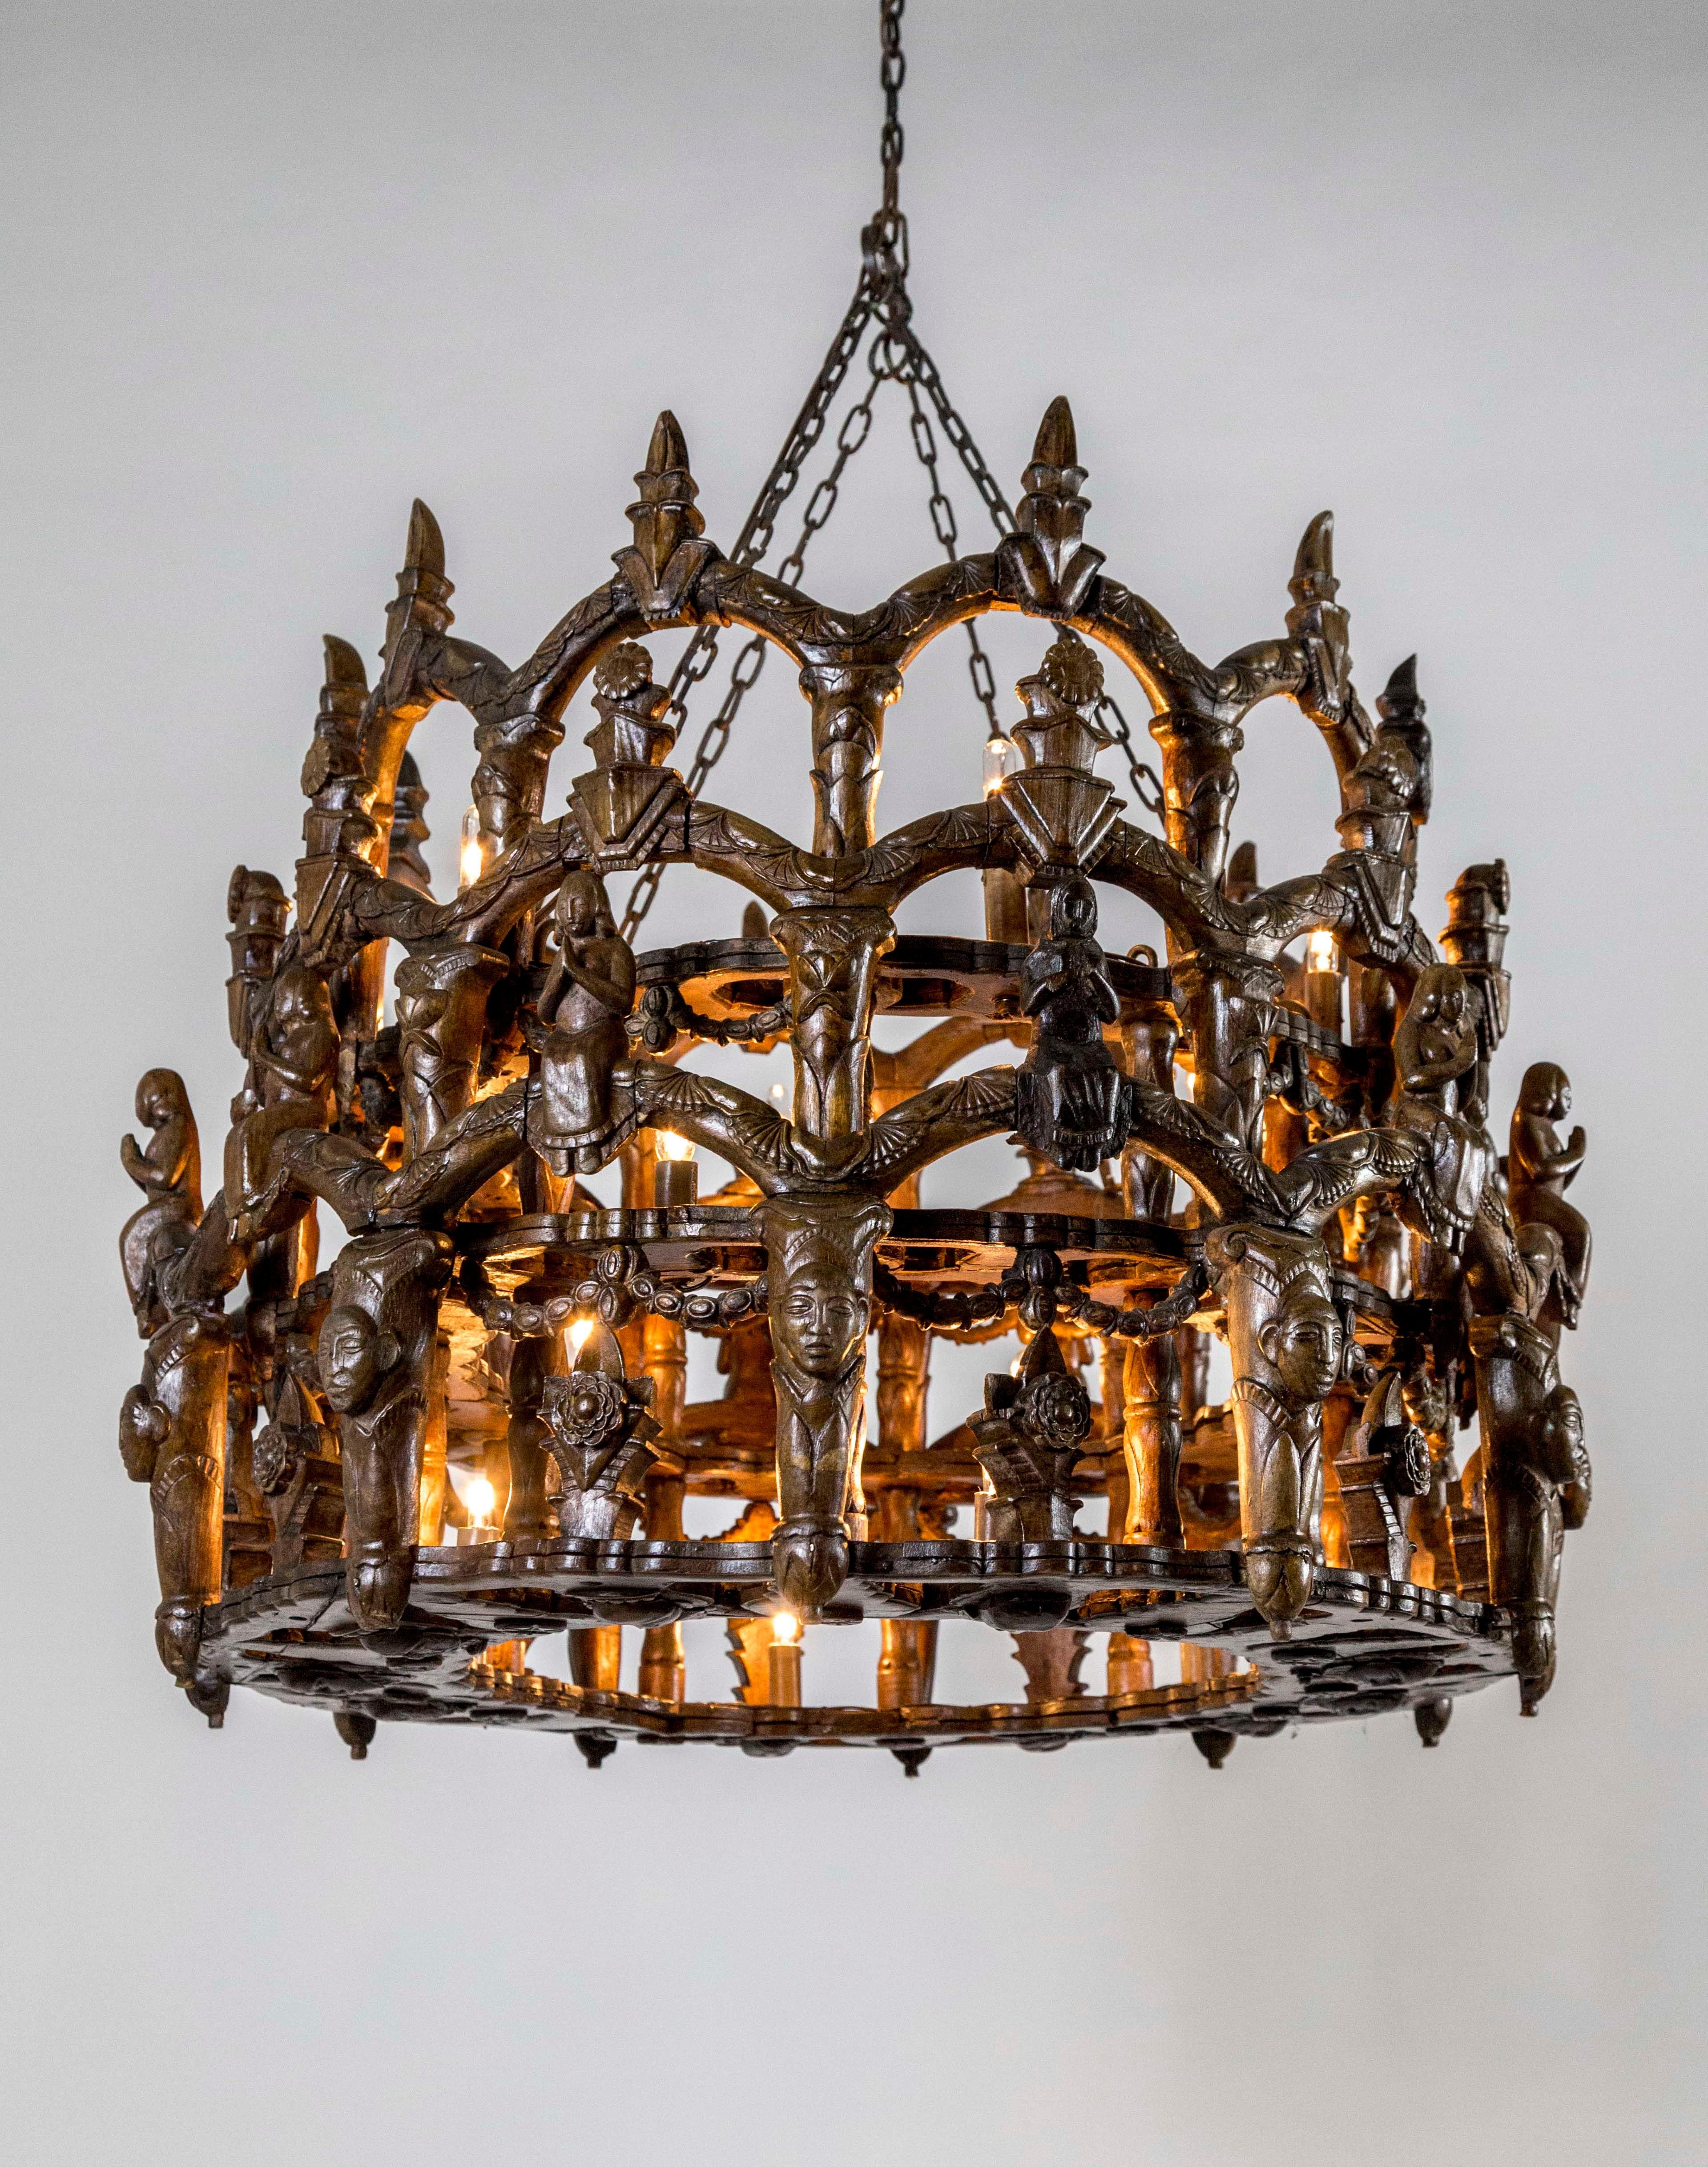 A wooden, oval shaped, folk chandelier from the late 19th century made in Central or South America with Spanish Colonial Gothic influence. The hand carved design is three tiers of arches with lotuses, flowers, praying ladies, faces, and garland. 18